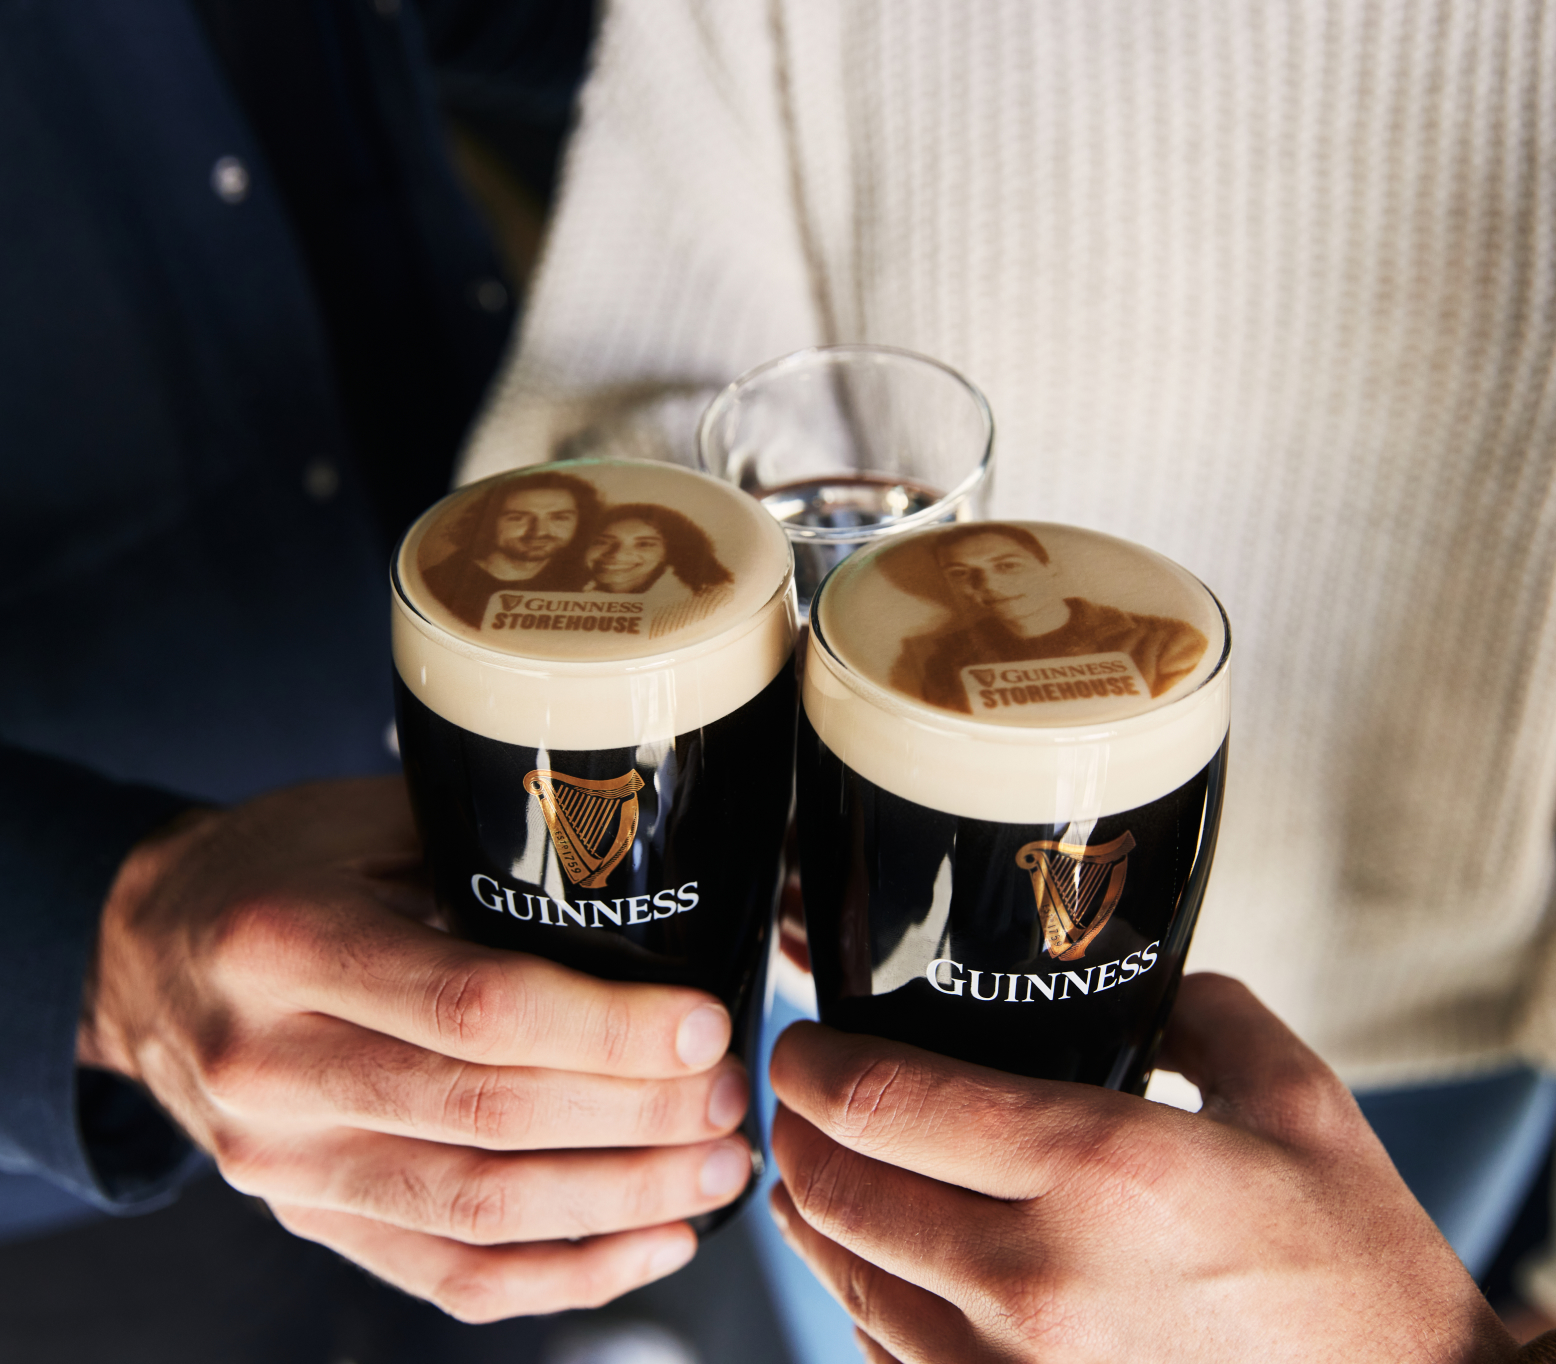 Two pints of Guinness with visitors faces printed on it